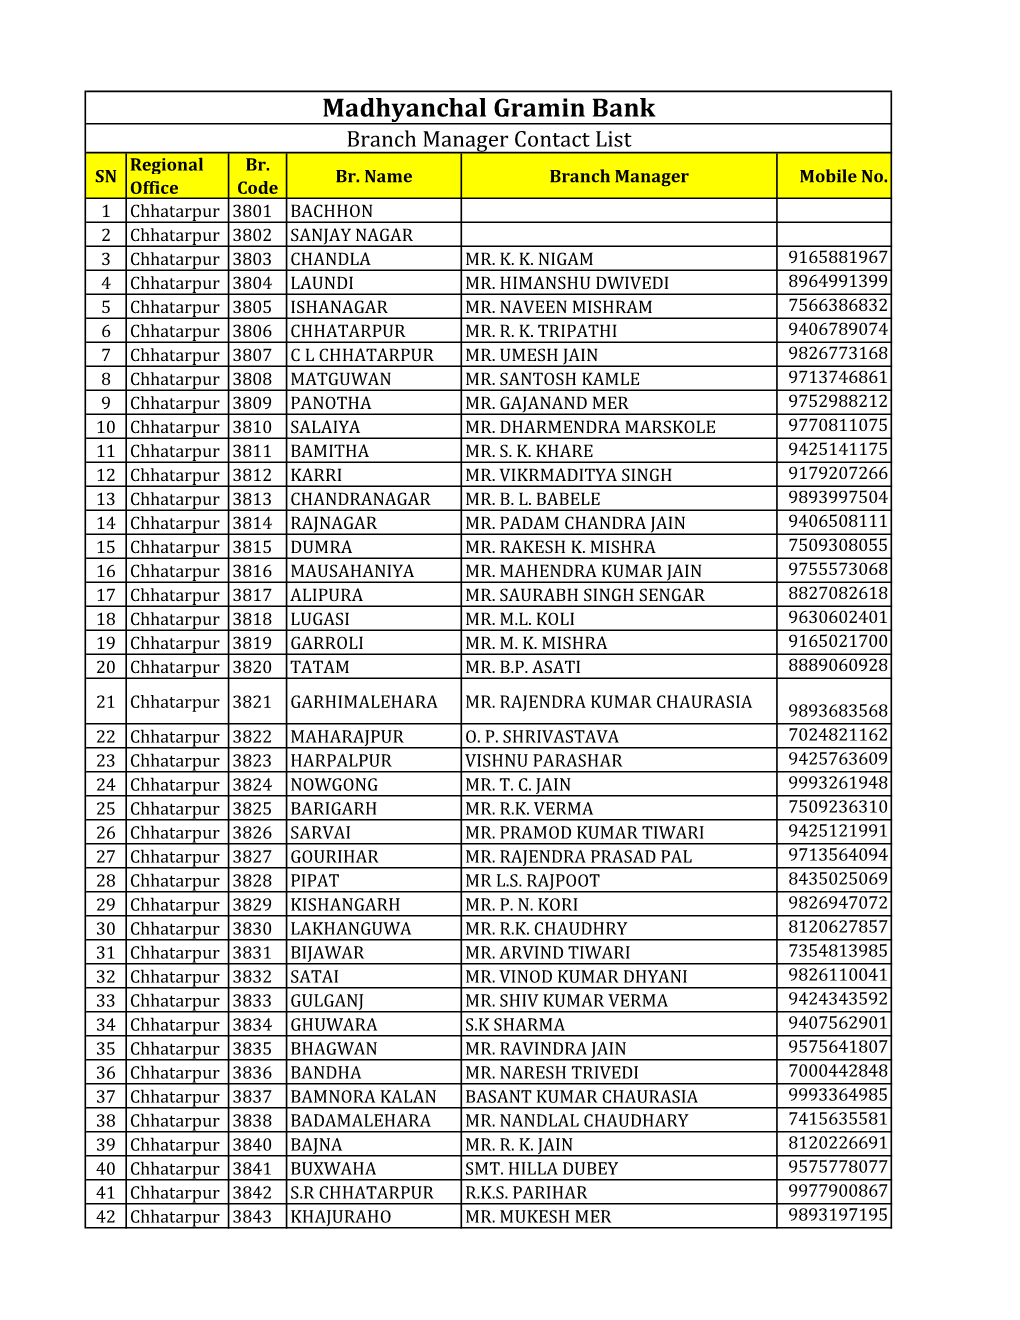 Madhyanchal Gramin Bank Branch Manager Contact List Regional Br